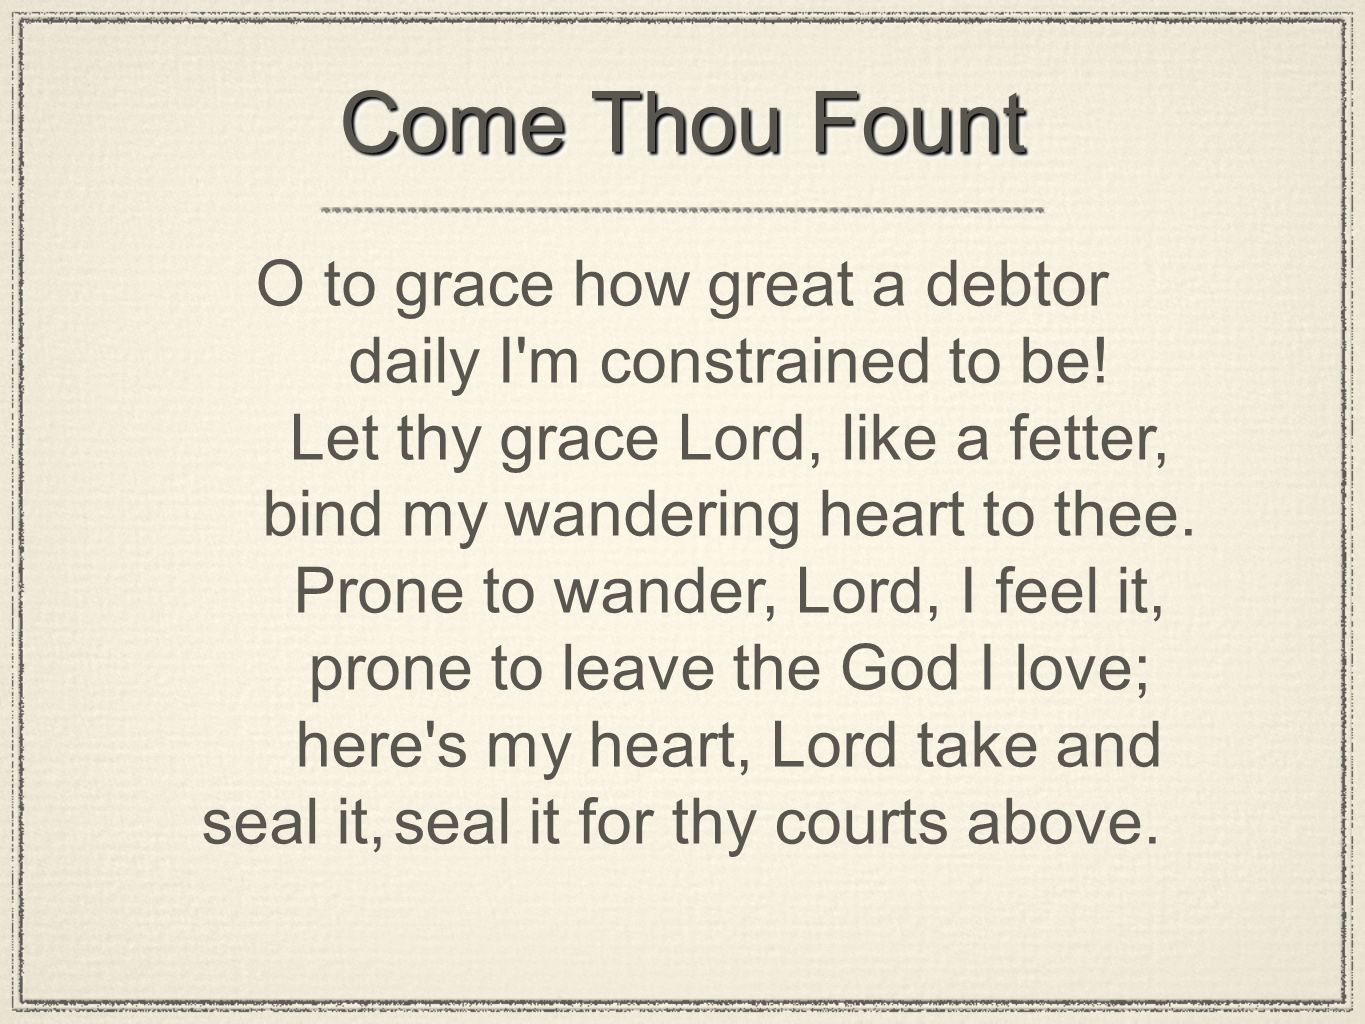 Come Thou Fount O to grace how great a debtor daily I m constrained to be.